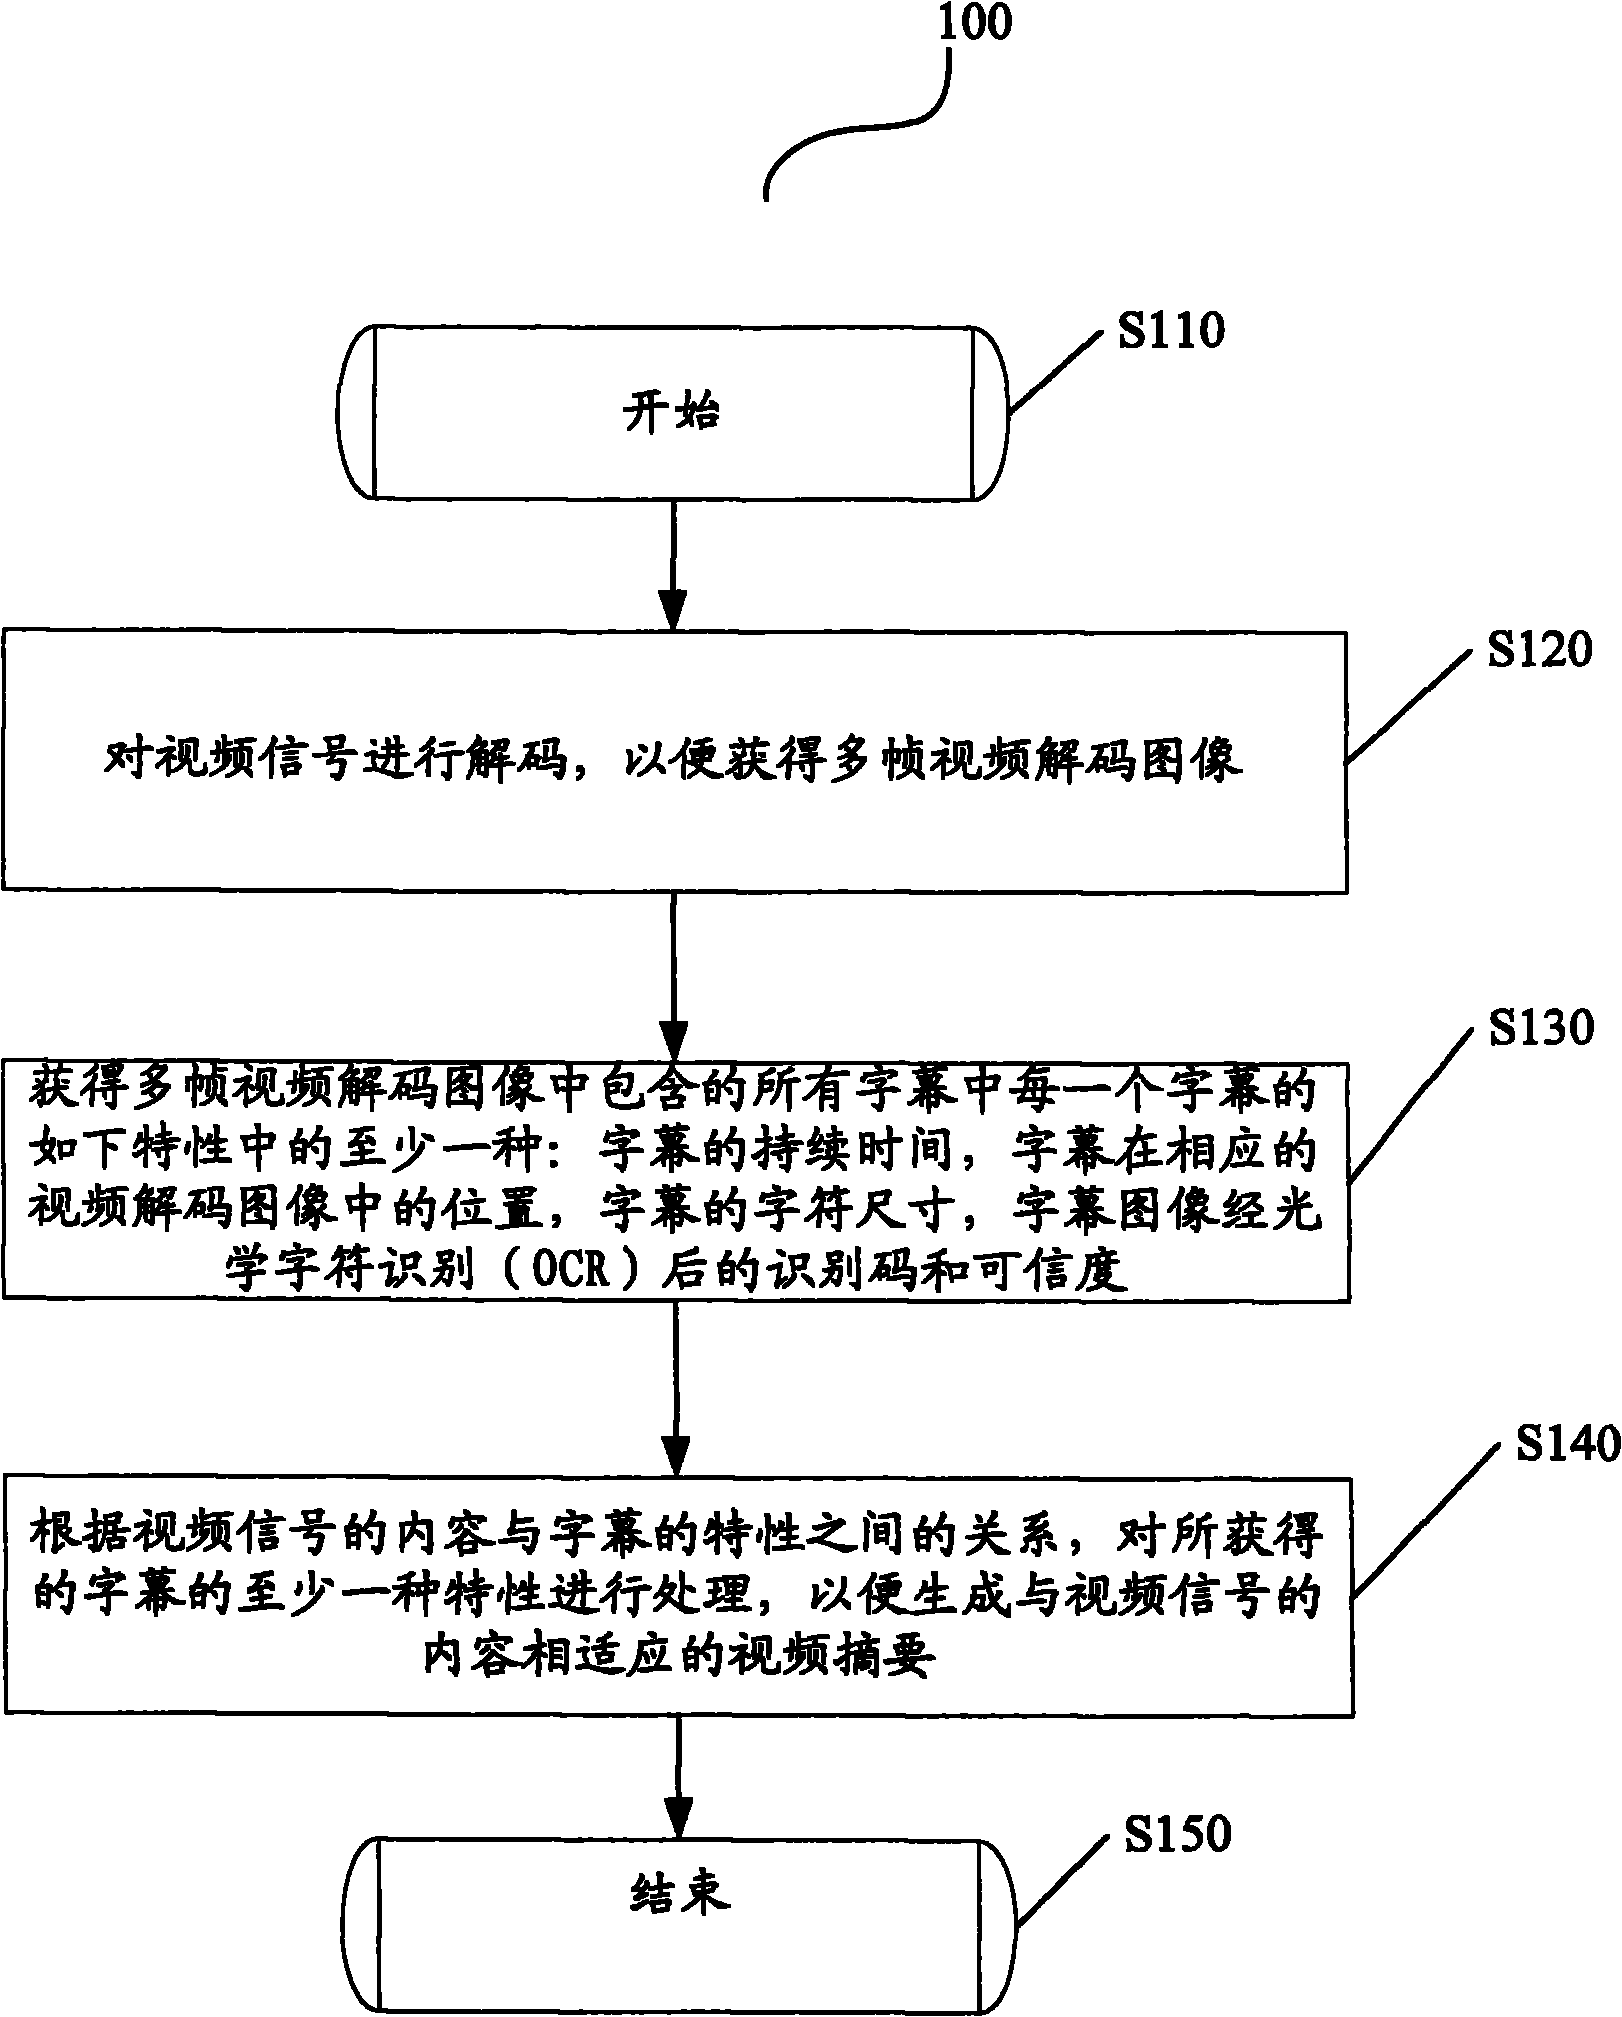 Method and device for generating video abstract and image processing system including device